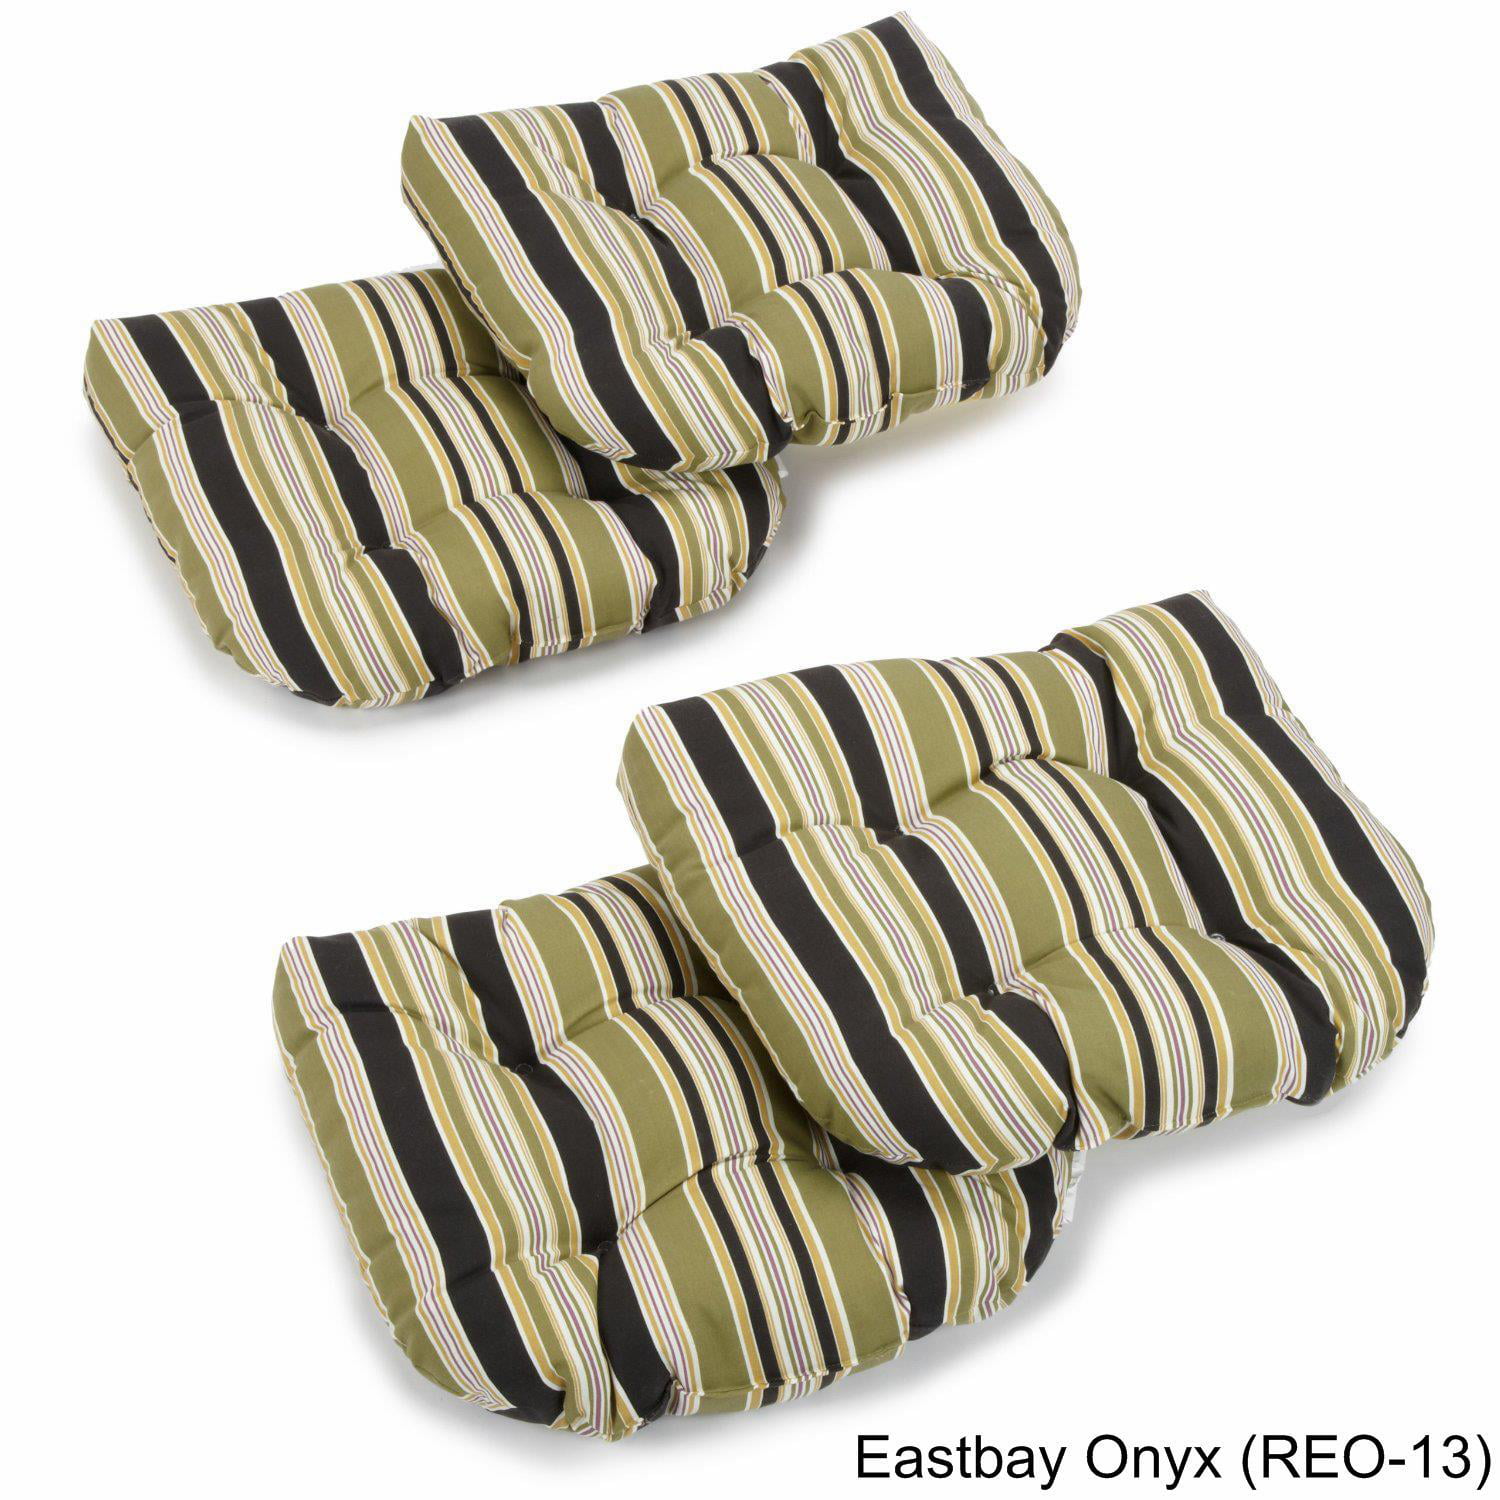 19-inch U-Shaped Spun Polyester Outdoor Tufted Dining Chair Cushions ...